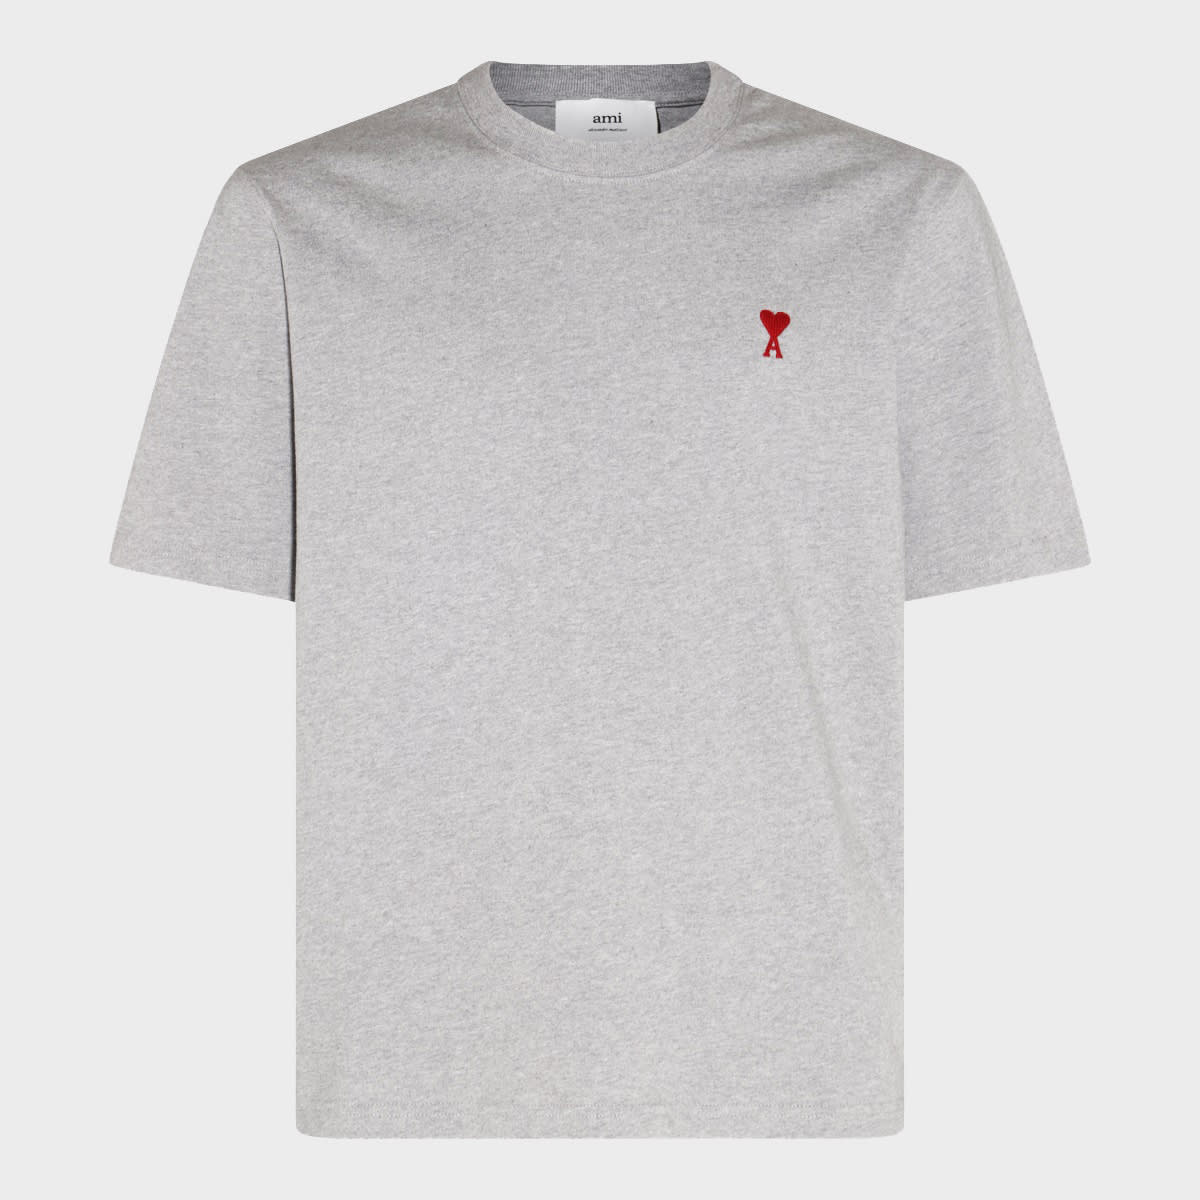 Grey And Red Cotton Ami De Coeur T-shirt